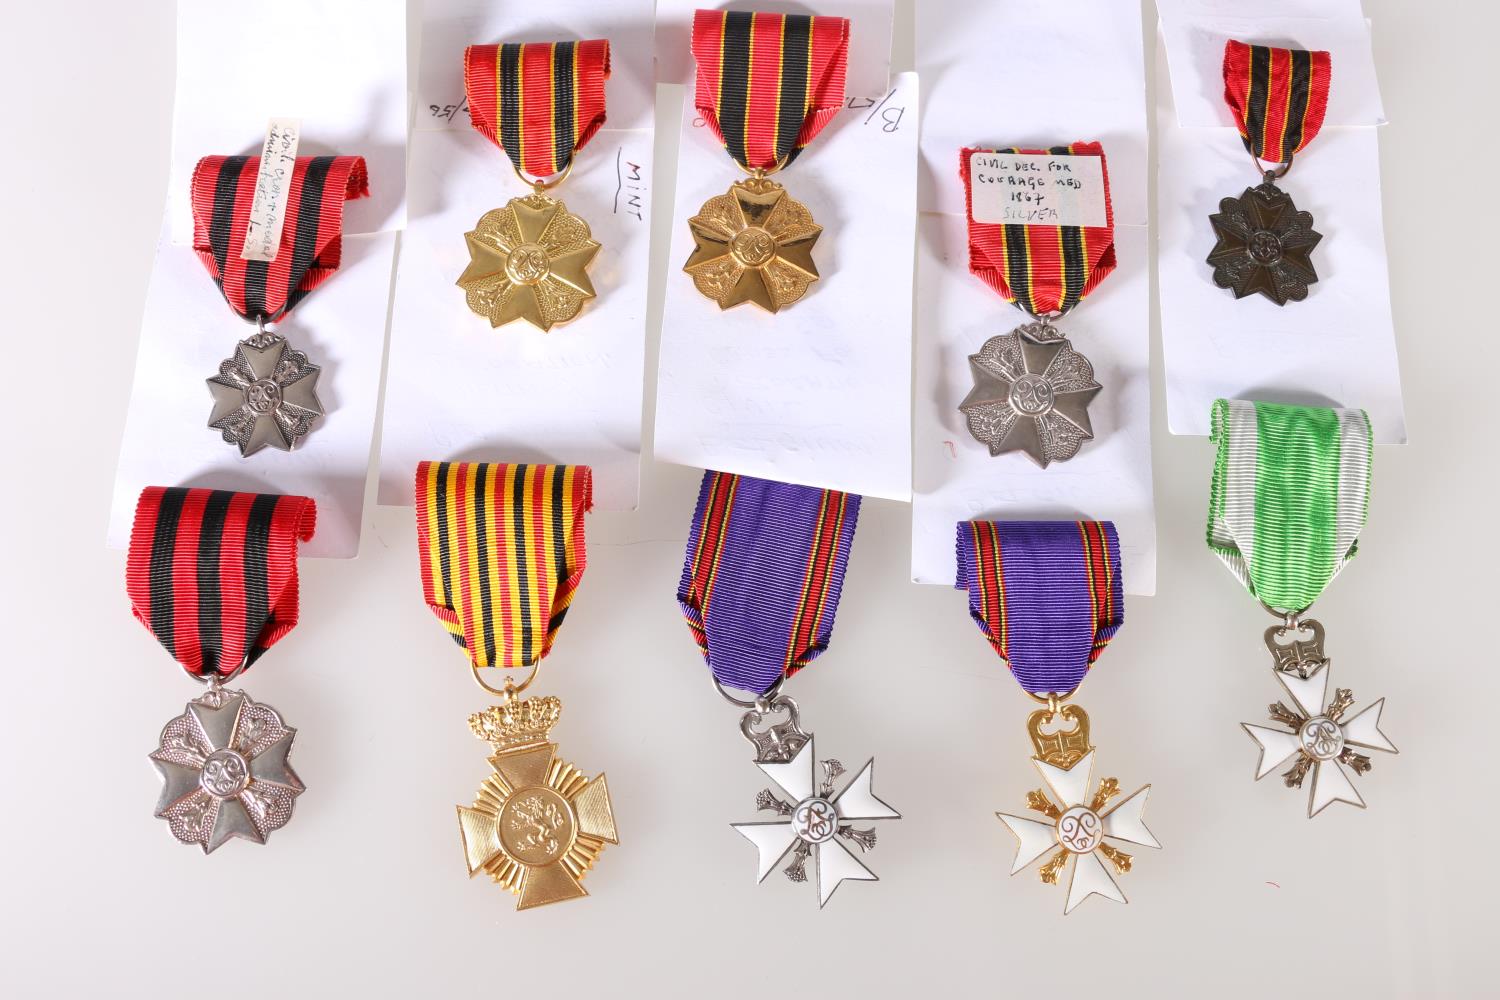 BELGIUM. Belgian medals including Military decoration for long service 2nd Class, Civil decoration - Image 2 of 2